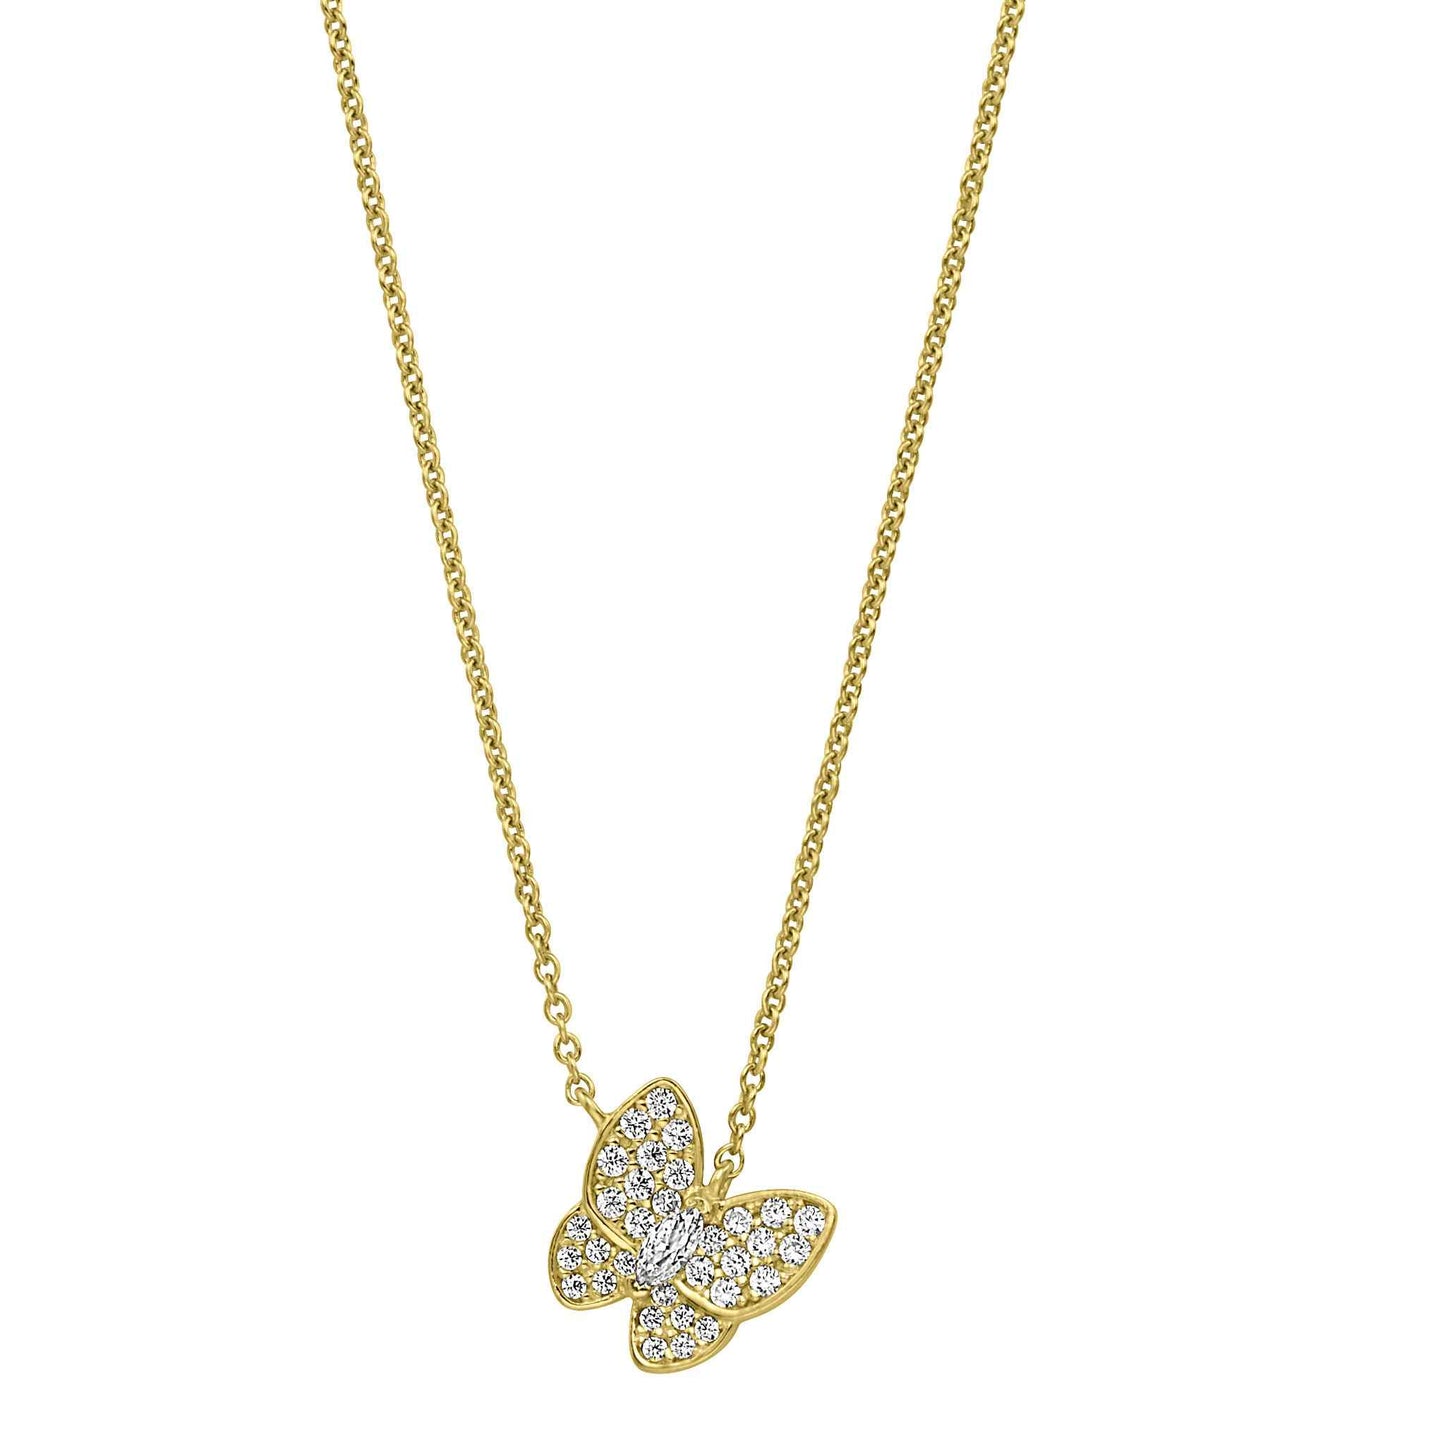 A butterfly necklace with simulated diamonds displayed on a neutral white background.